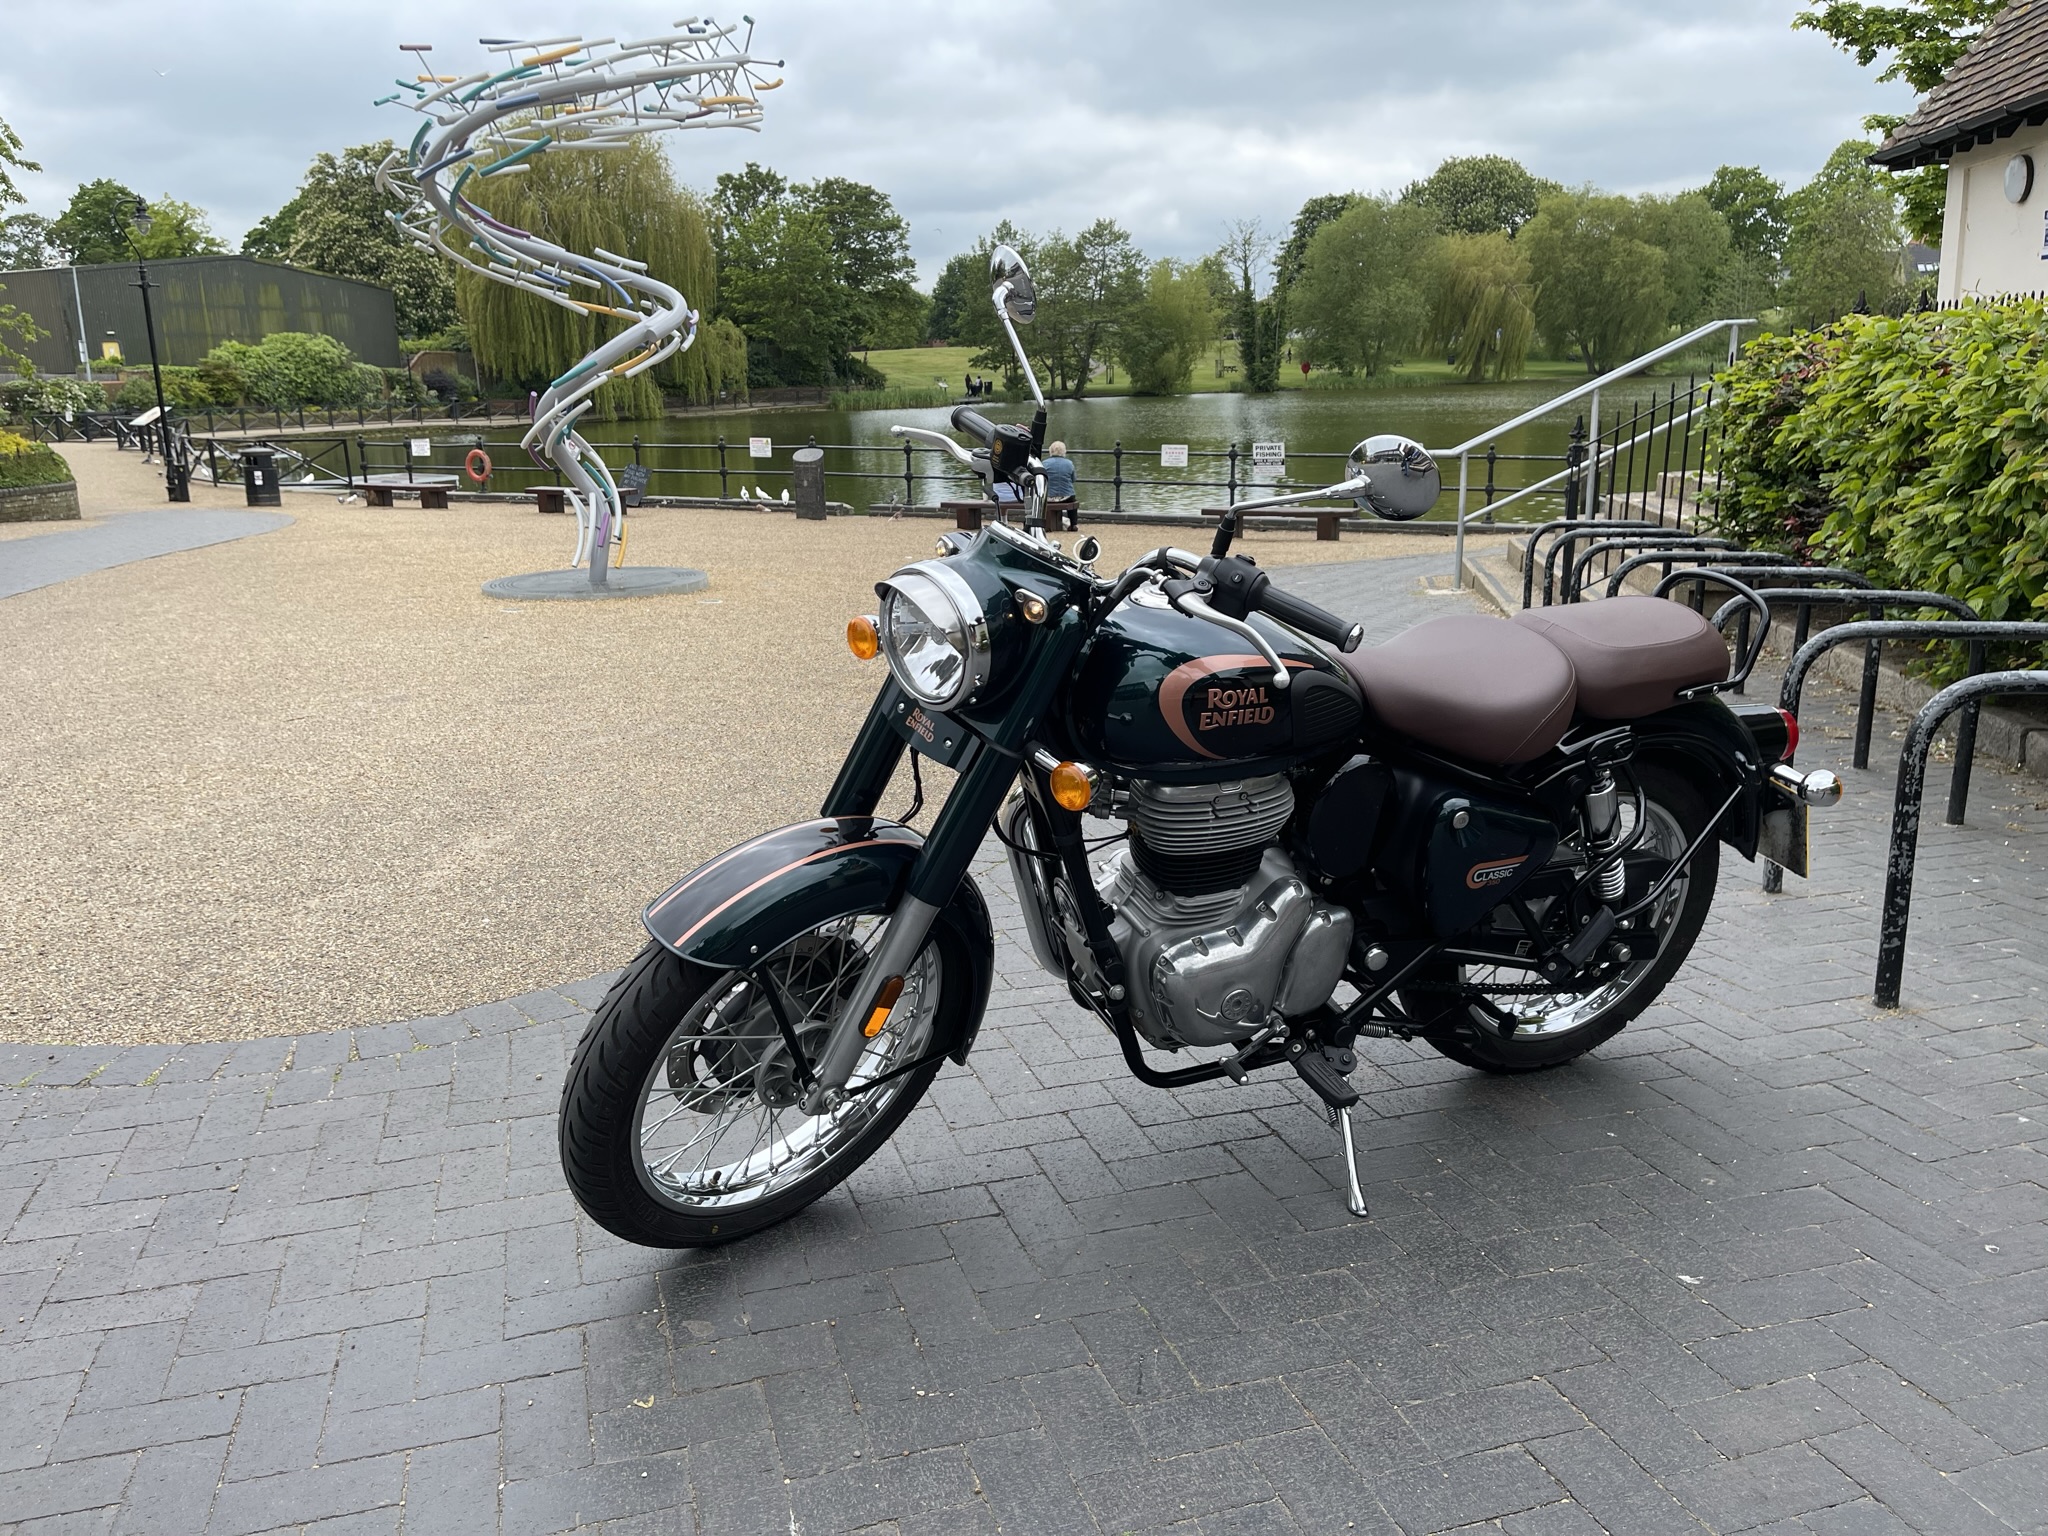 Royal Enfield Classic 350 at Diss Mere with new sculpture